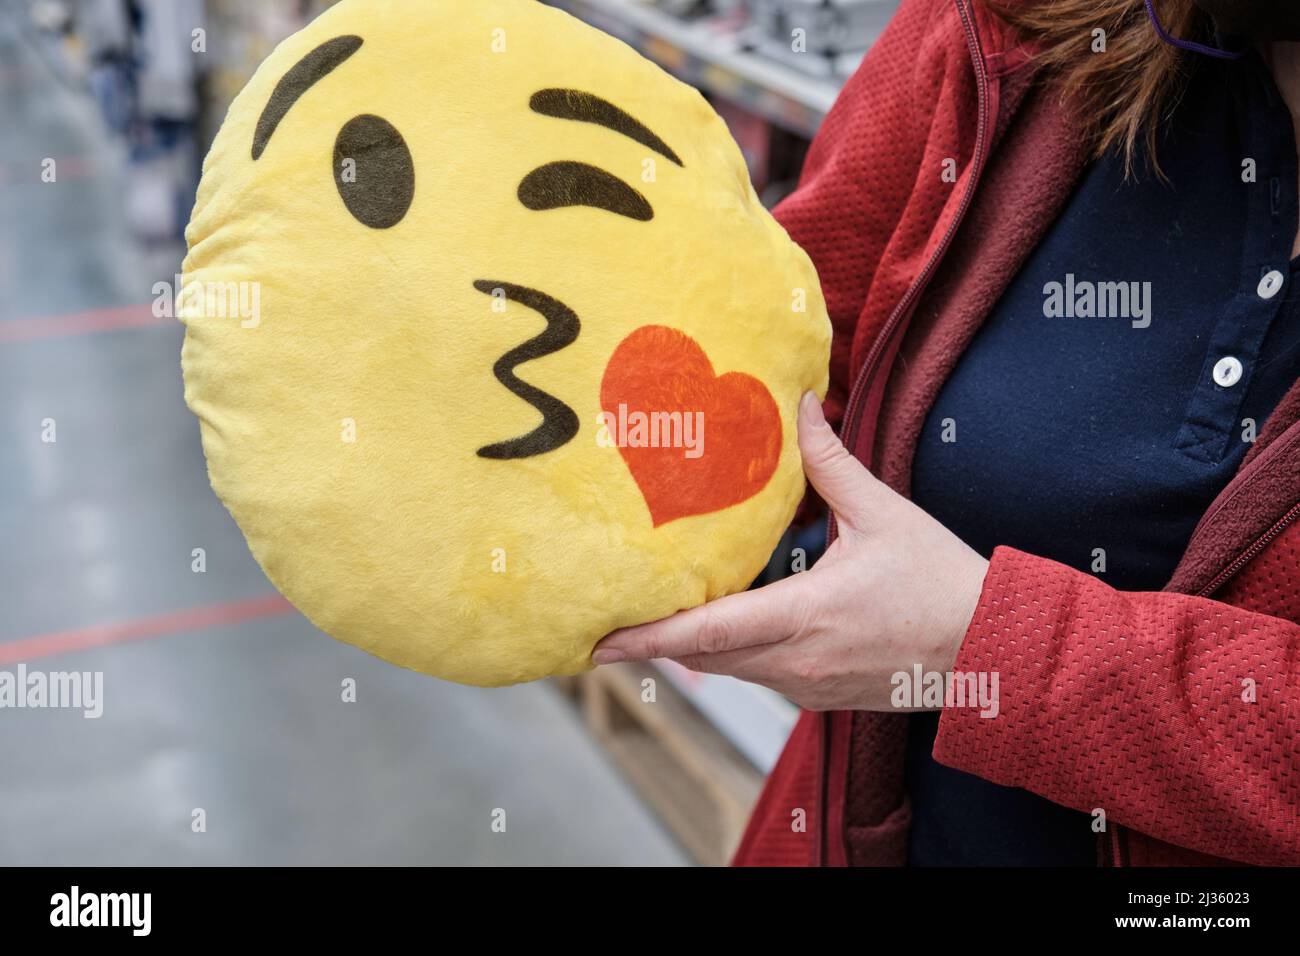 Girl in store buys funny pillow in form of yellow smiley face for car seat Stock Photo